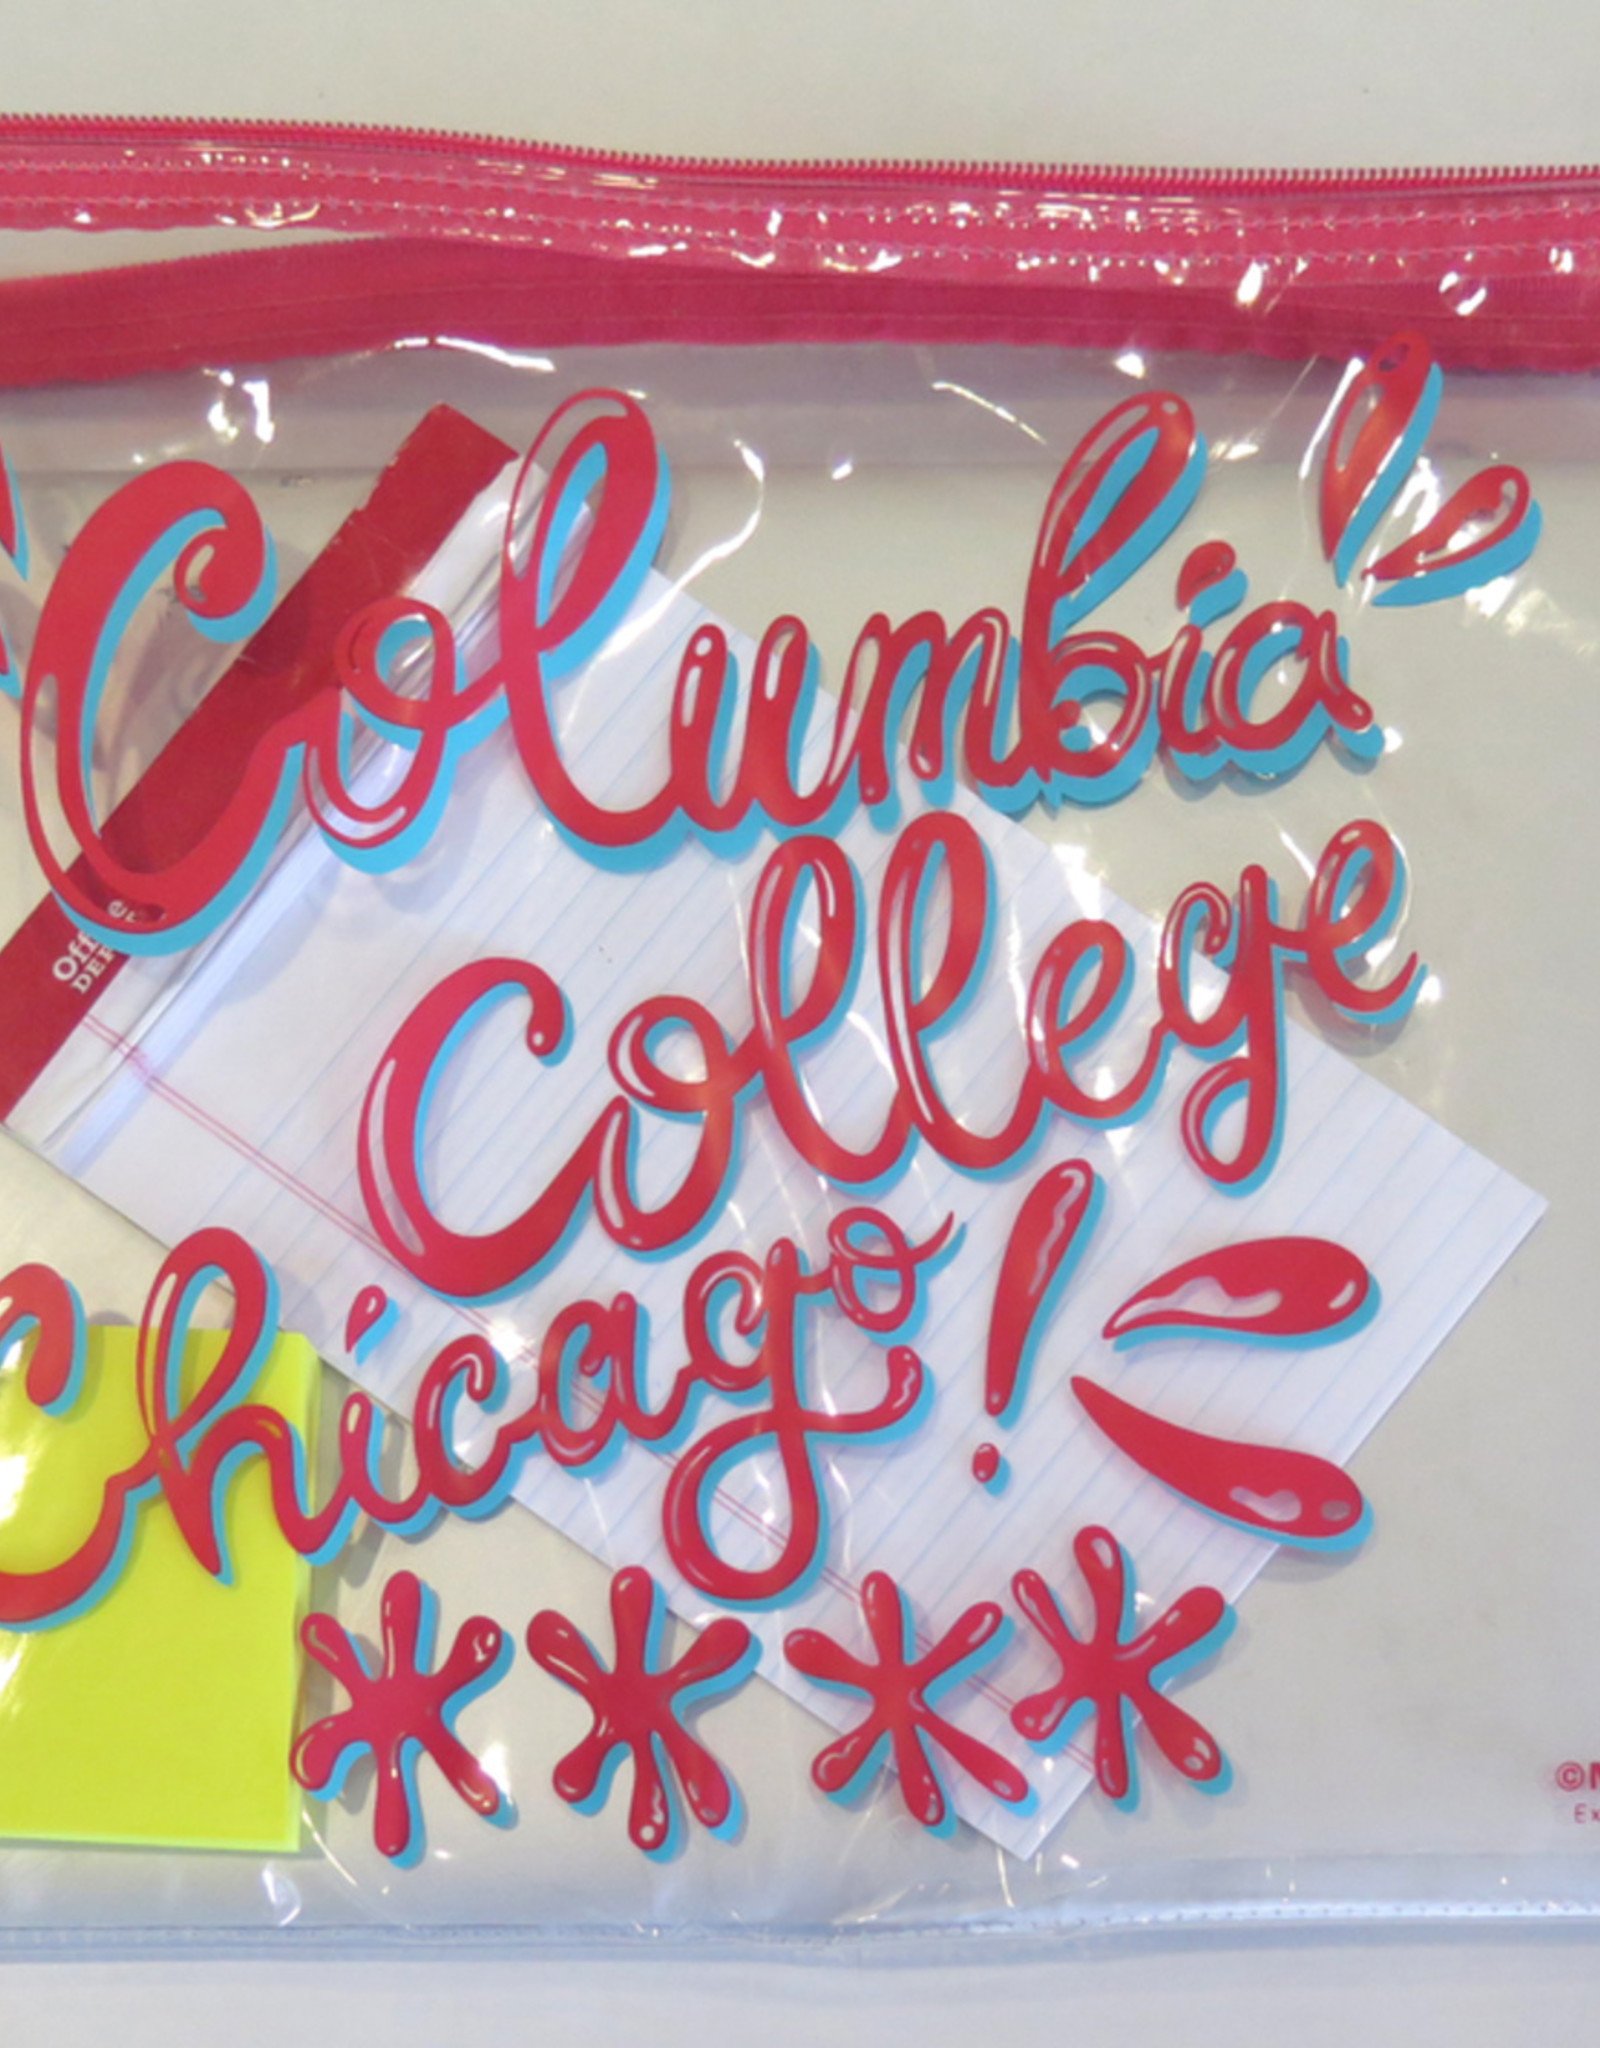 Buy Columbia, By Columbia Columbia College Chicago Clear Zipper Pouch - watermelon red